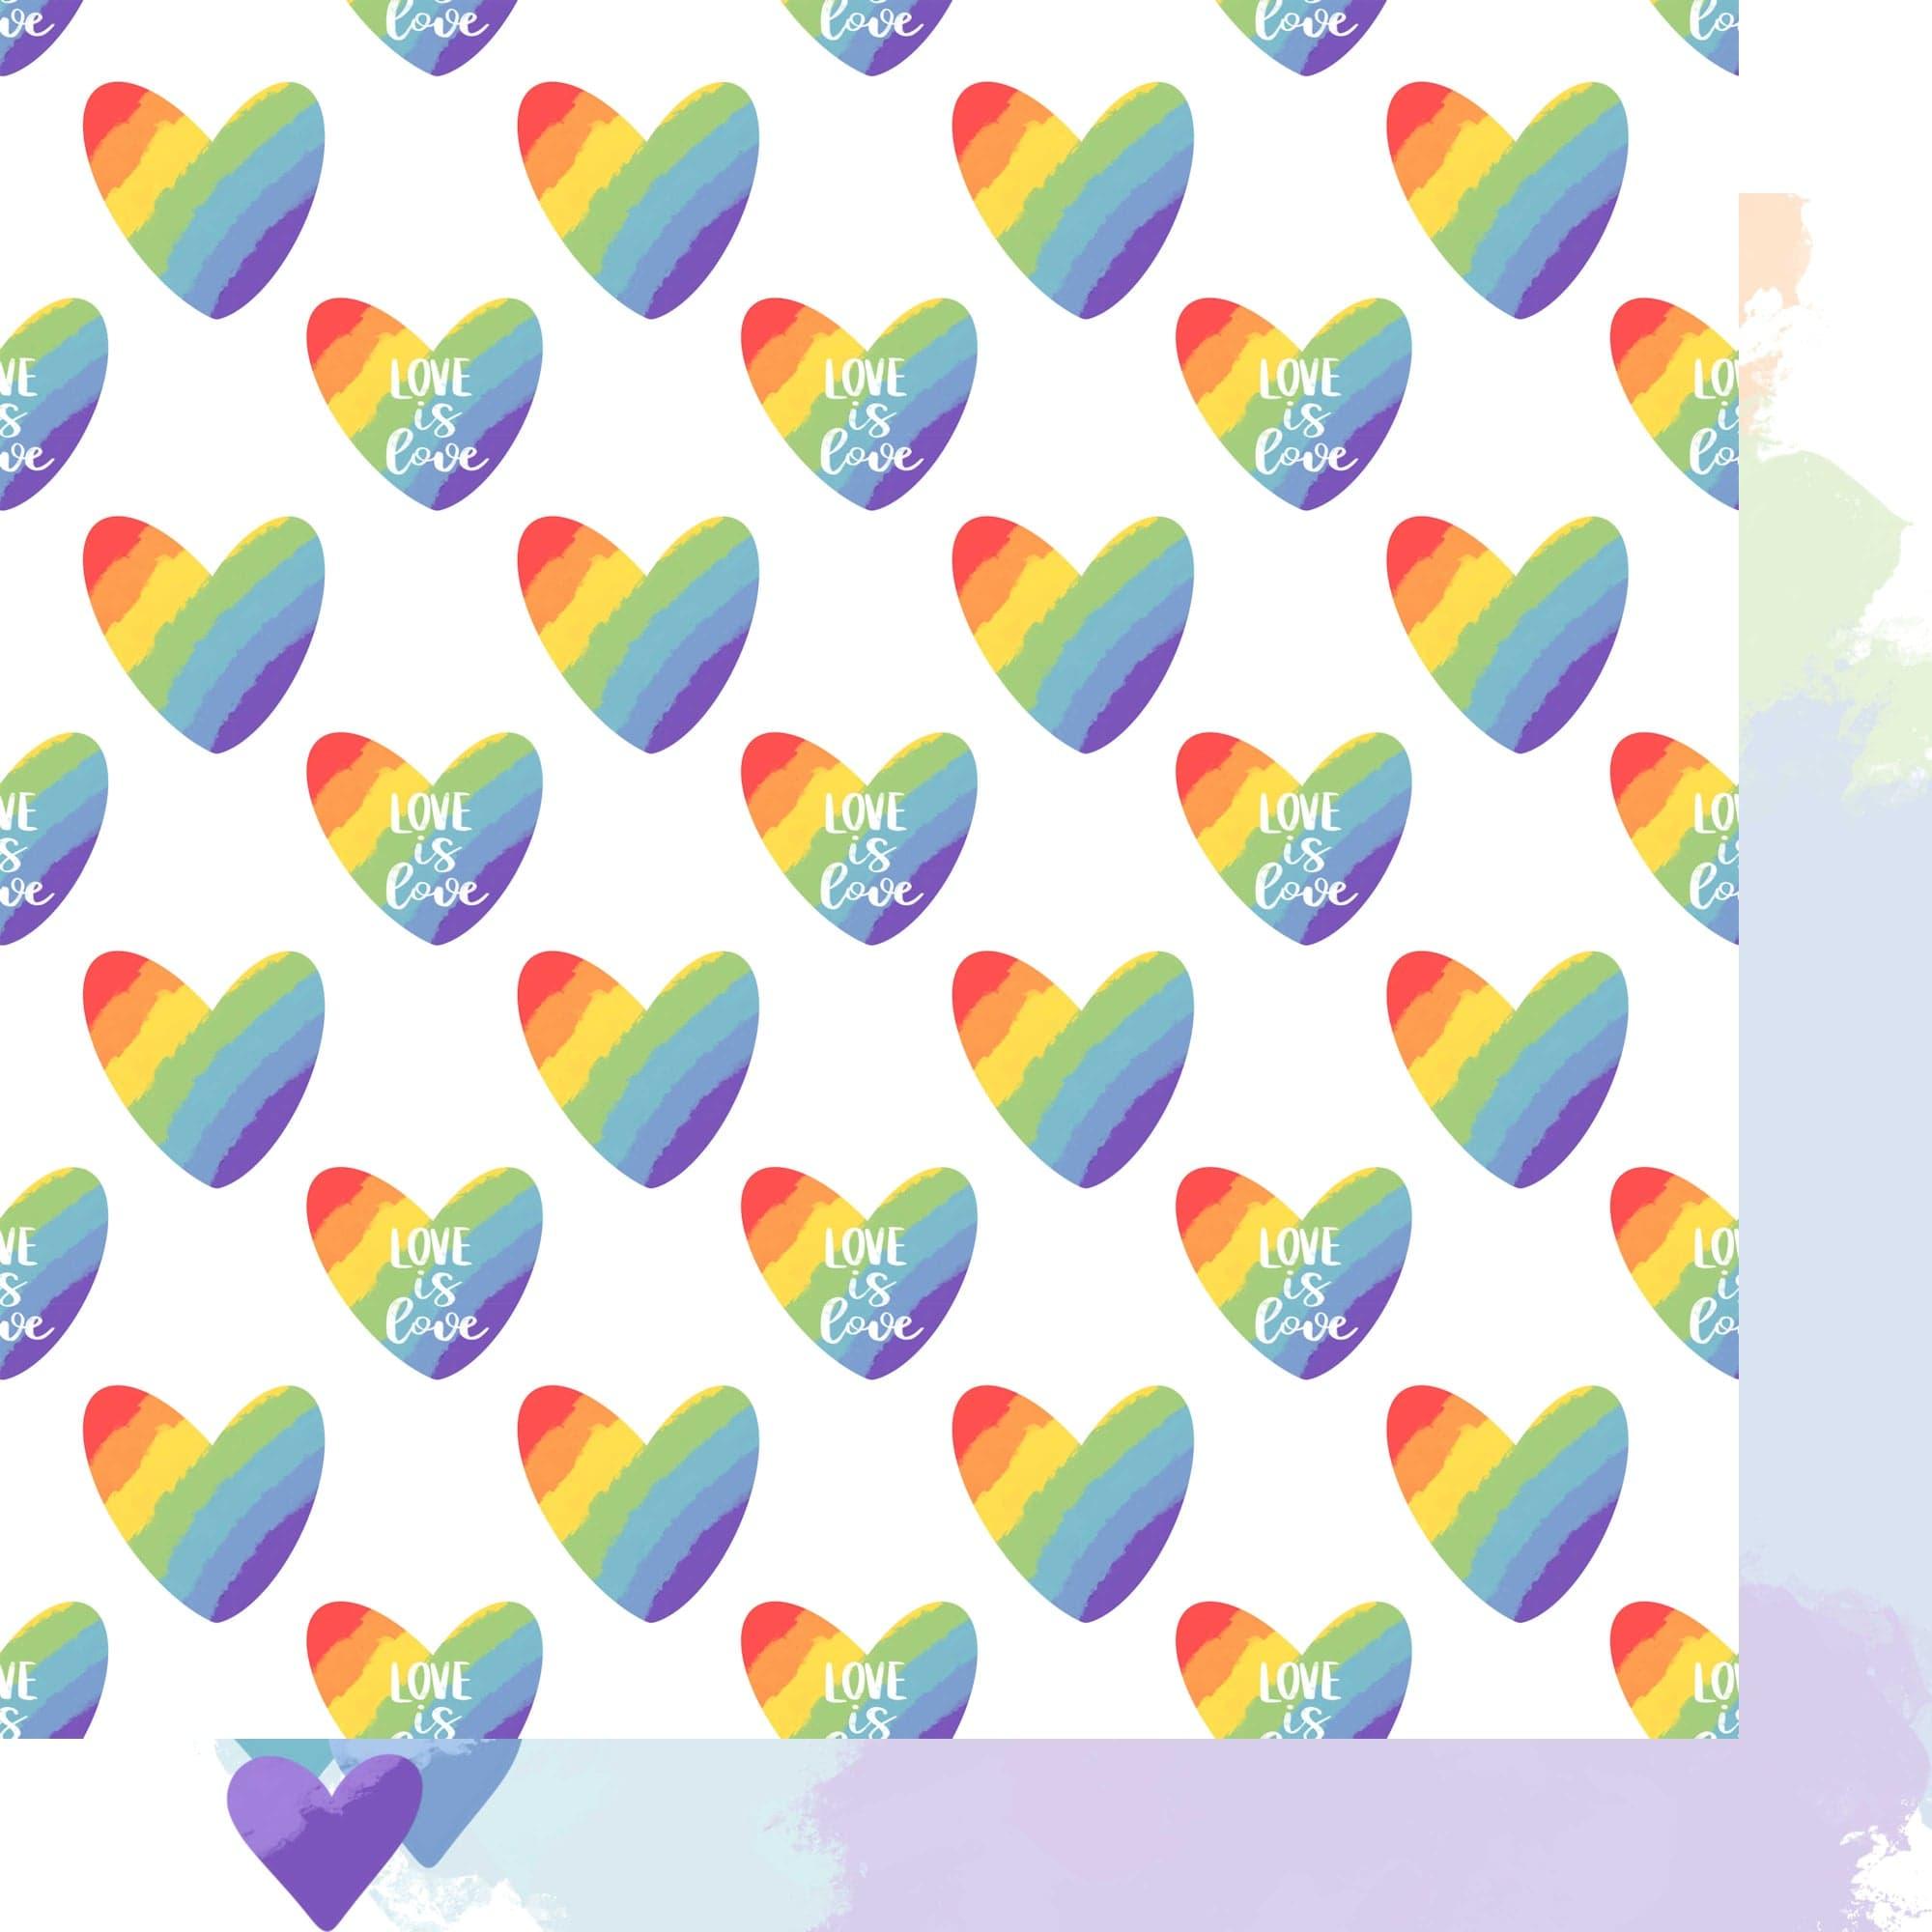 Love Wins Collection 12 x 12 Scrapbook Paper & Embellishment Kit by SSC Designs - Scrapbook Supply Companies